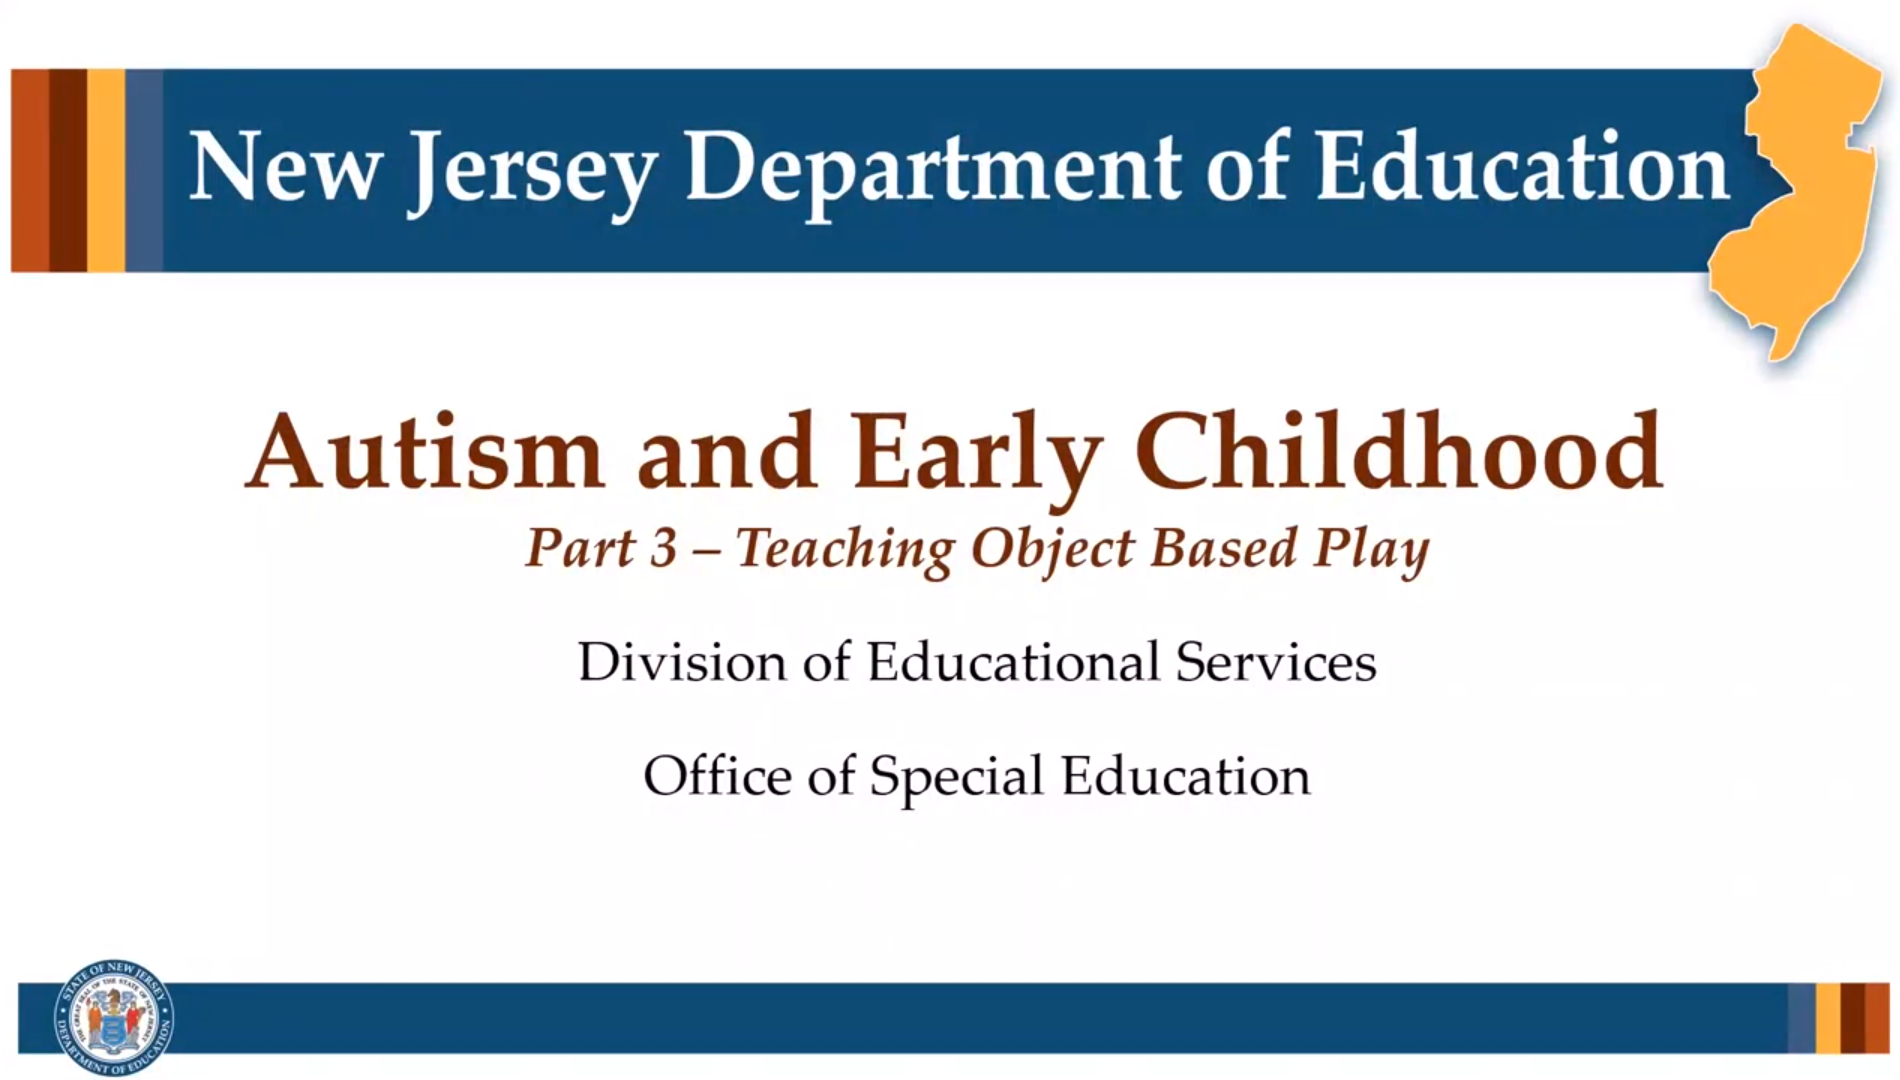 Powerpoint title slide for autism and early childhood part 3 purposeful play